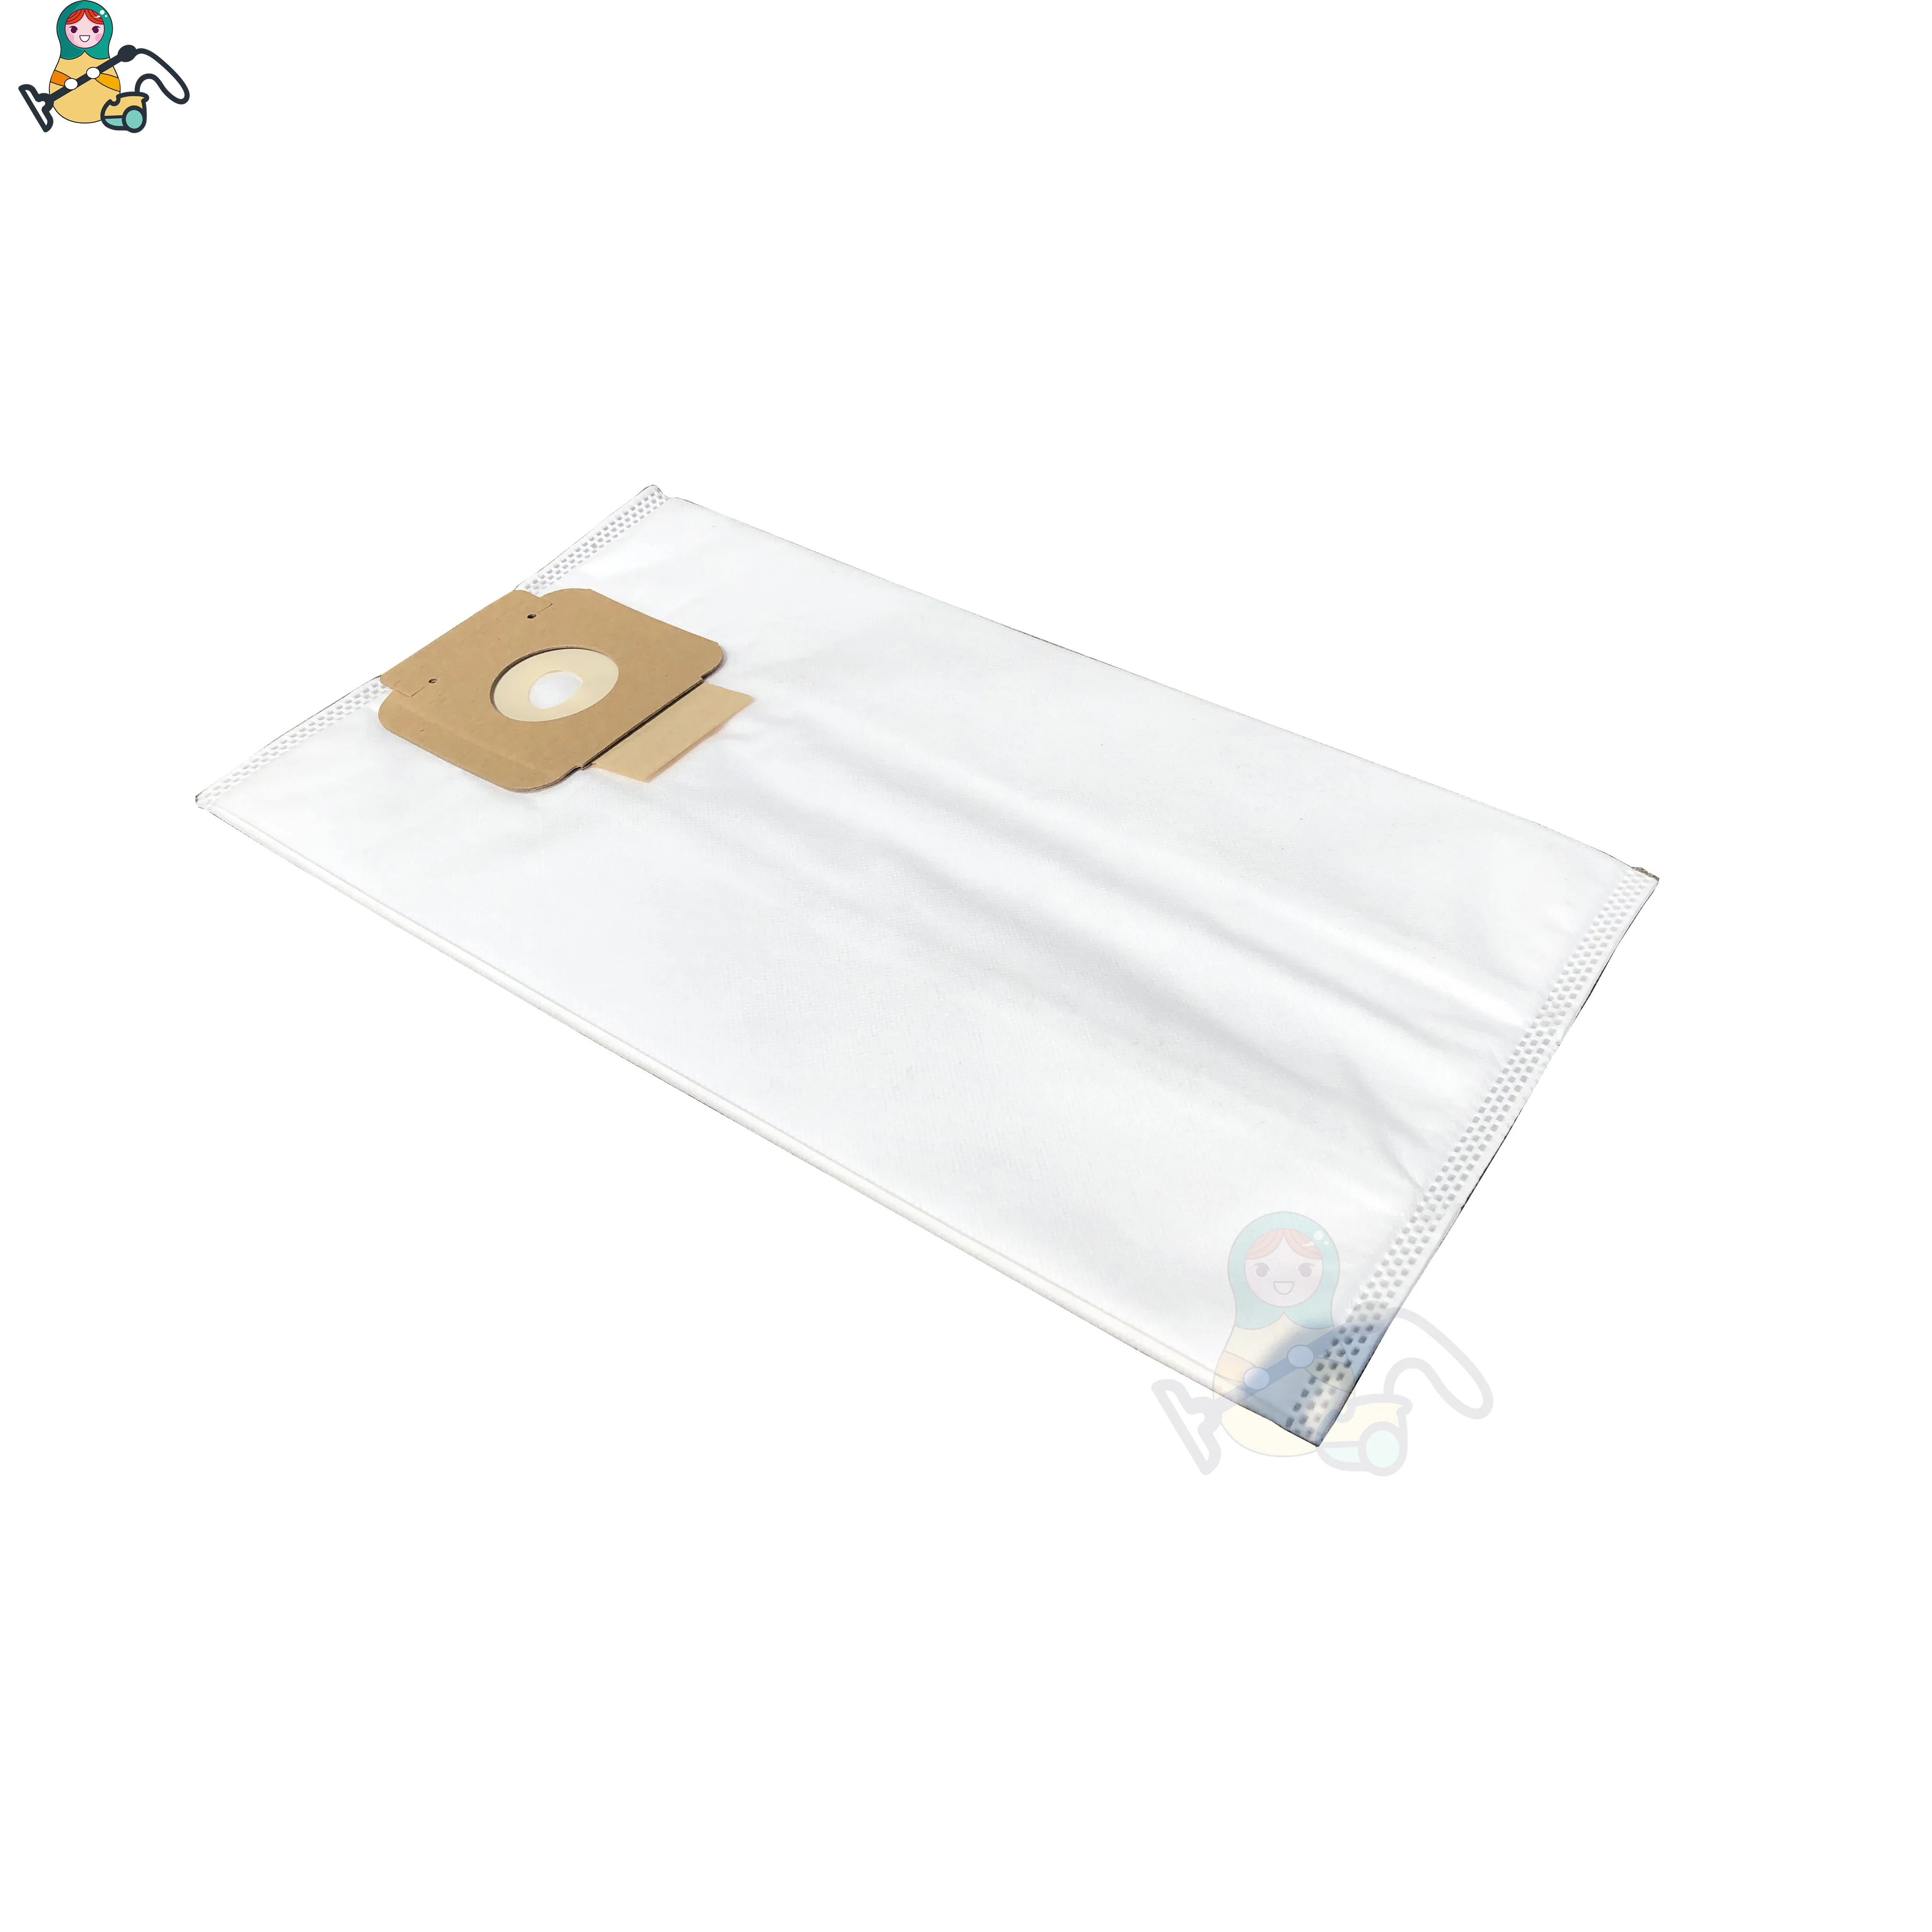 Filter dust bags for Karcher vacuum cleaner filter bags NT 361 Eco M NT 35/1 Eco 6.904-351.0 6.907-662.0 6.904-367.0 parts